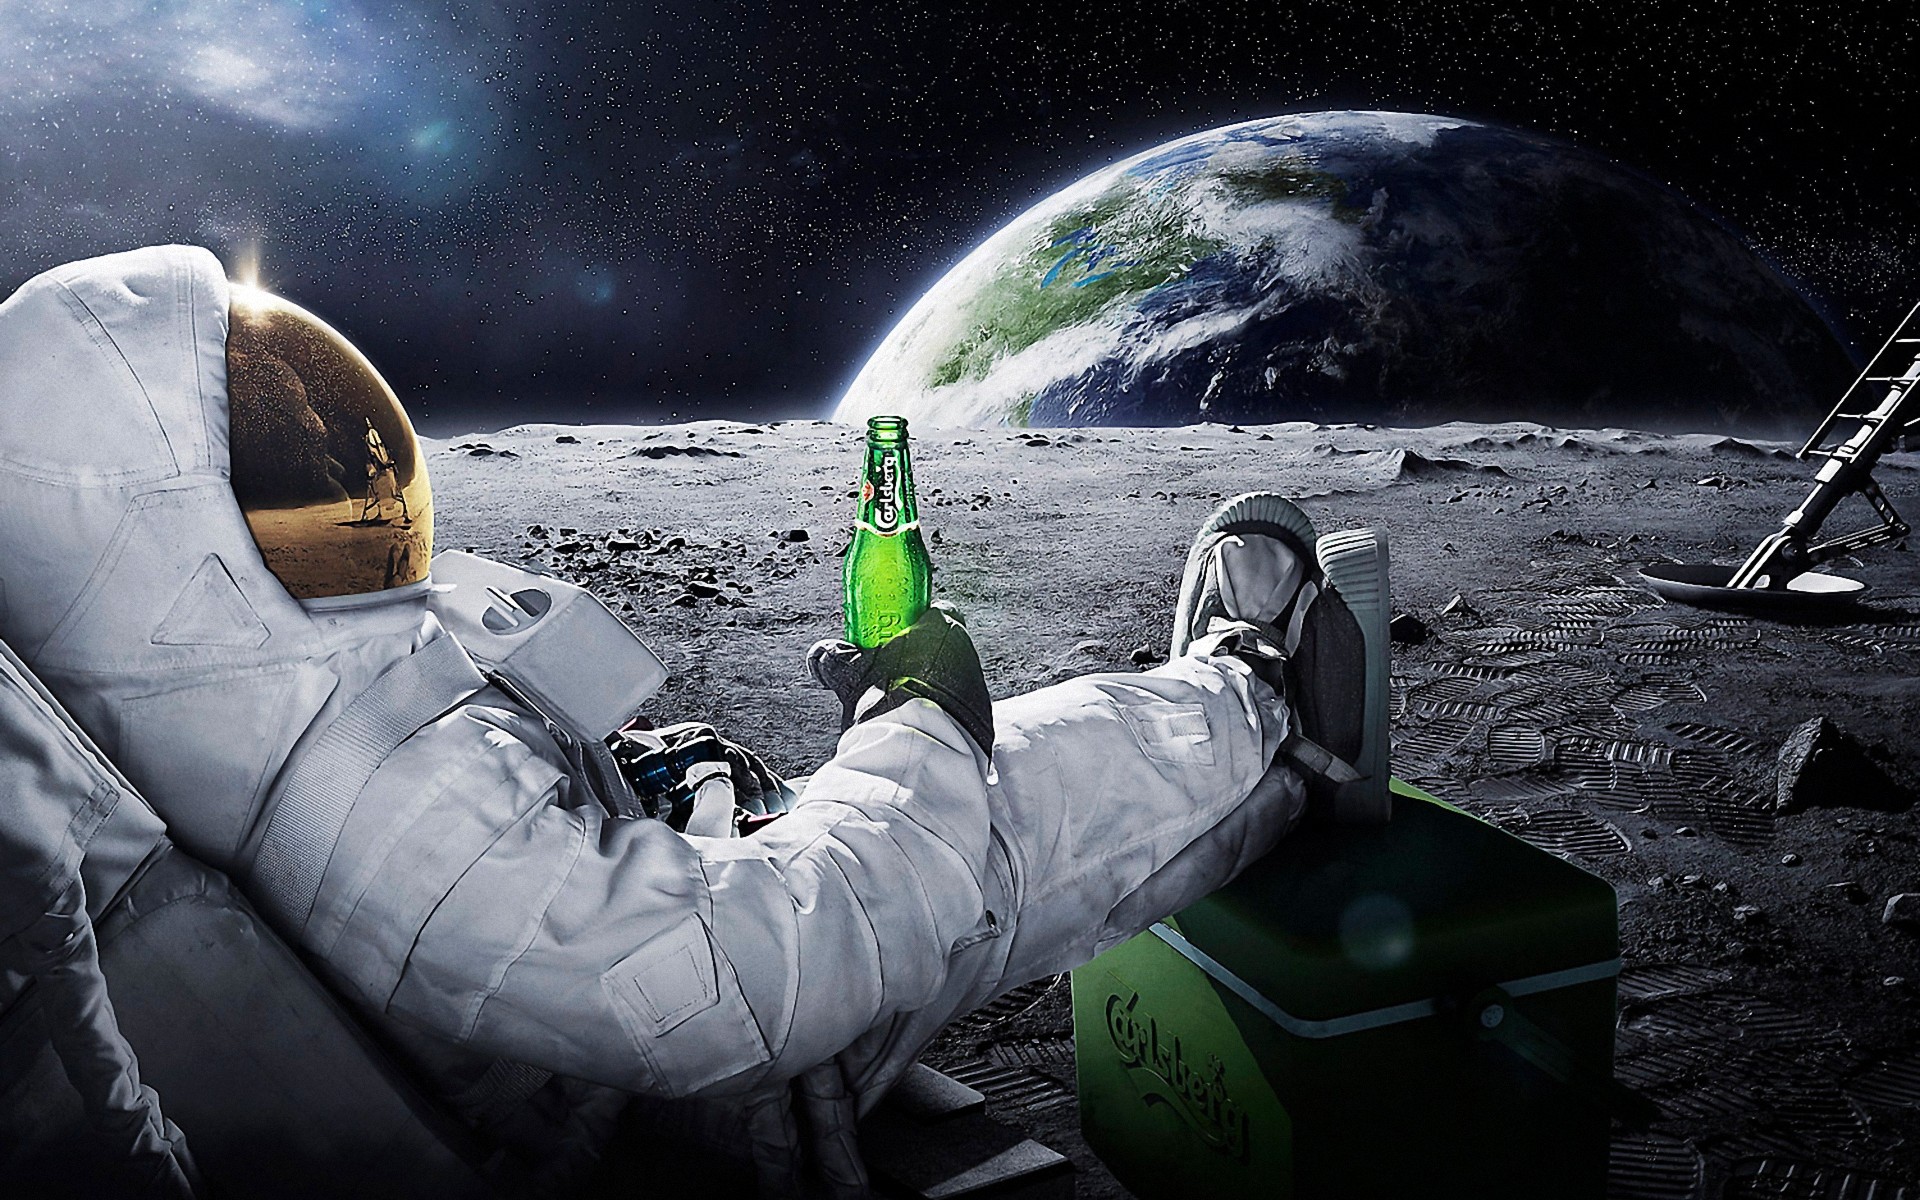 beers, Outer, Space, Earth, Astronauts, Relaxing, Carlsberg, Moon, Landing Wallpapers...